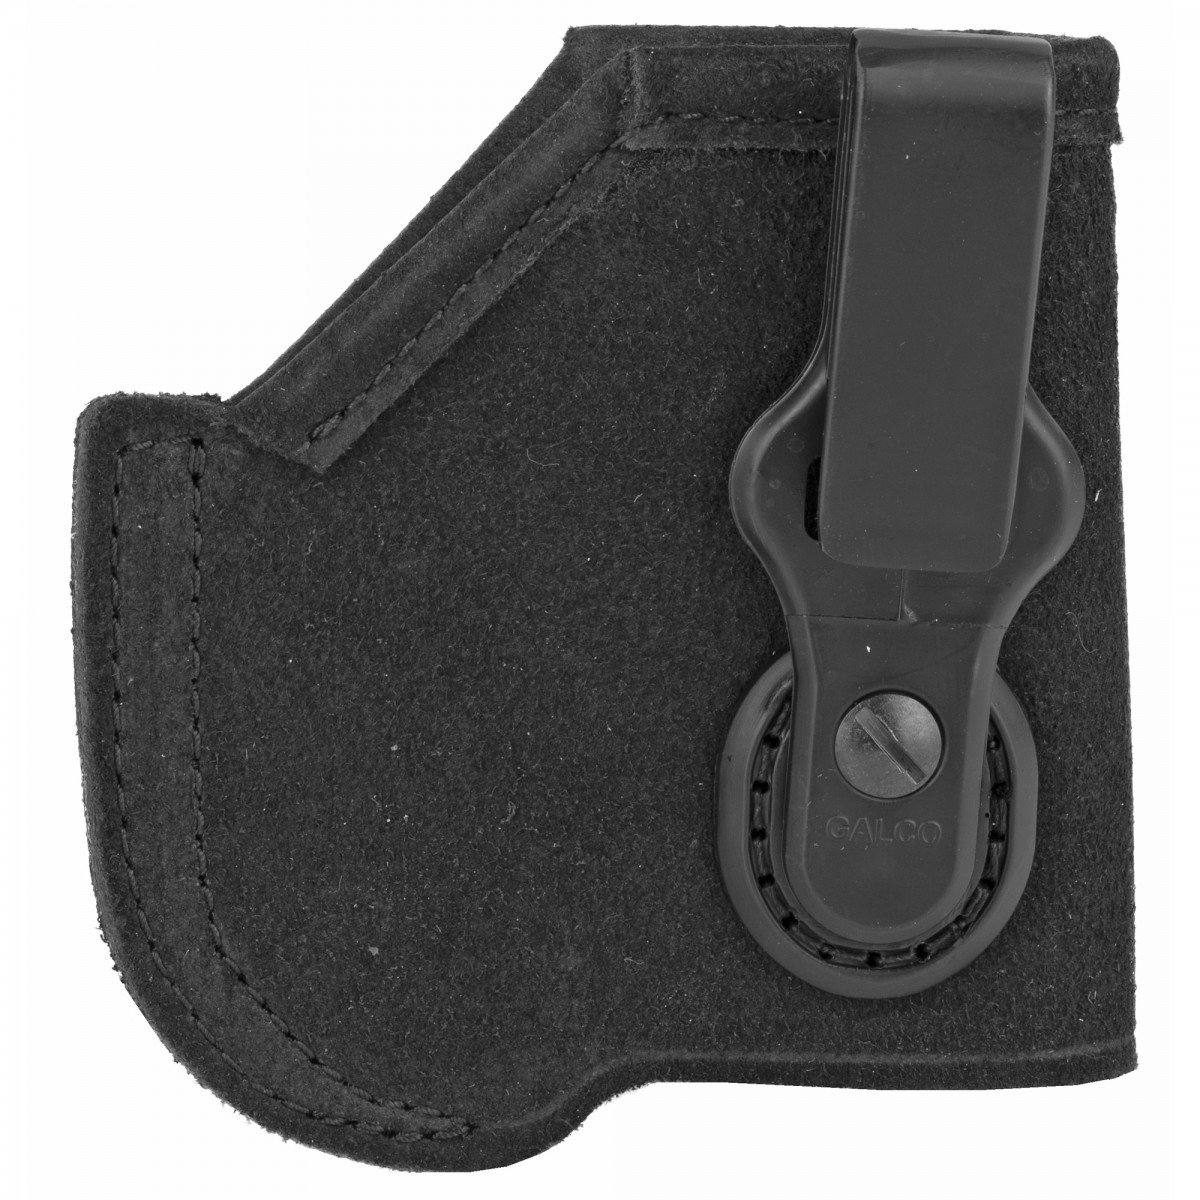 Galco Tuck-N-Go 2.0 IWB Ambidextrous Holster for Smith & Wesson M&P ...